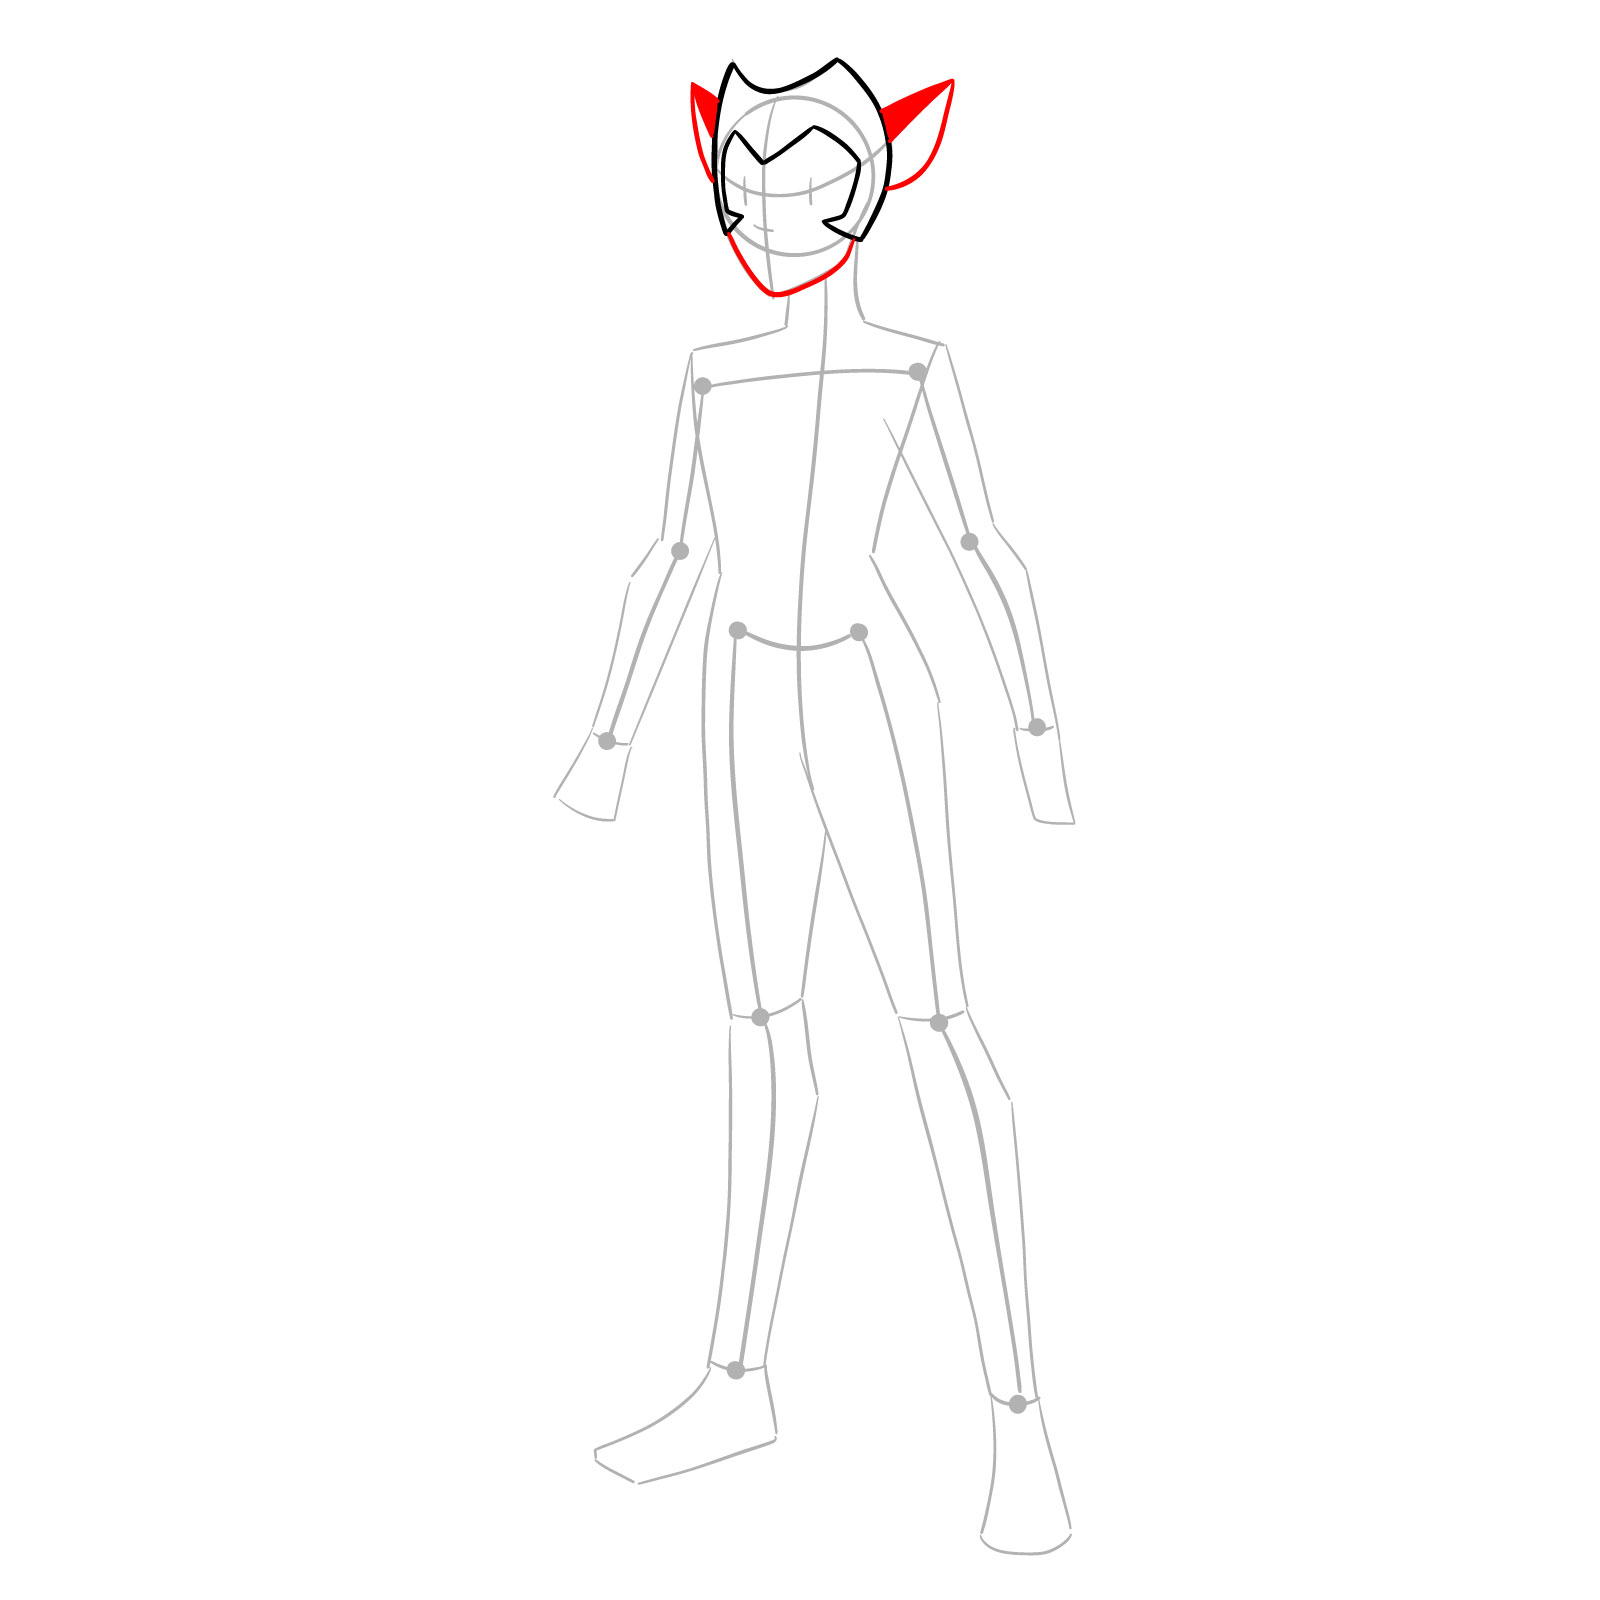 How to draw Catra from She-Ra and the Princesses of Power - step 05